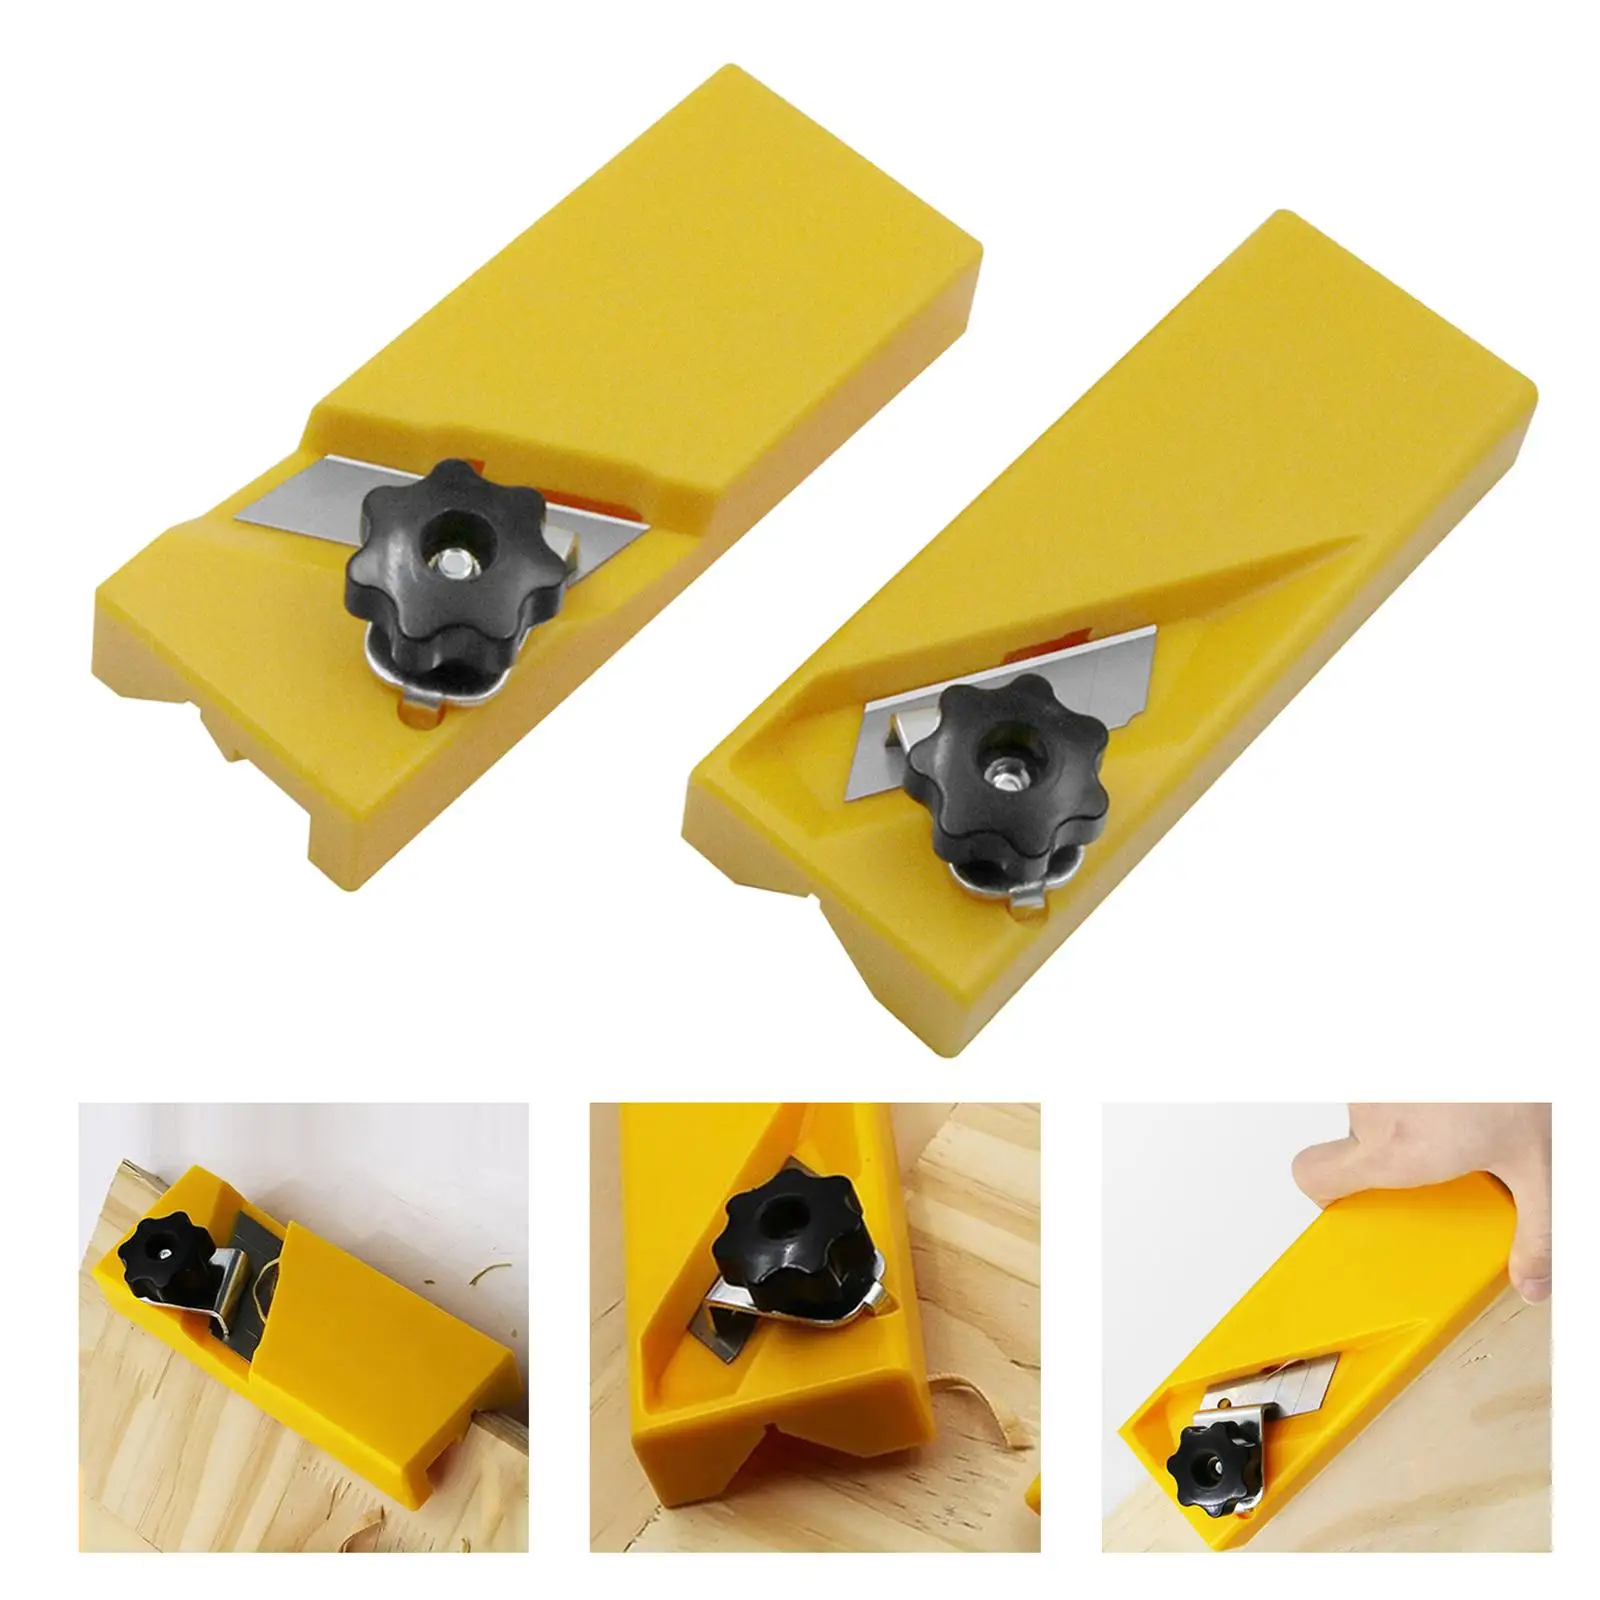 90° Chamfer Trimming Cutter Woodworking Board Planer Tool Manual Wood Knife Carpenter Bottom Deburring Edge Planing Blade